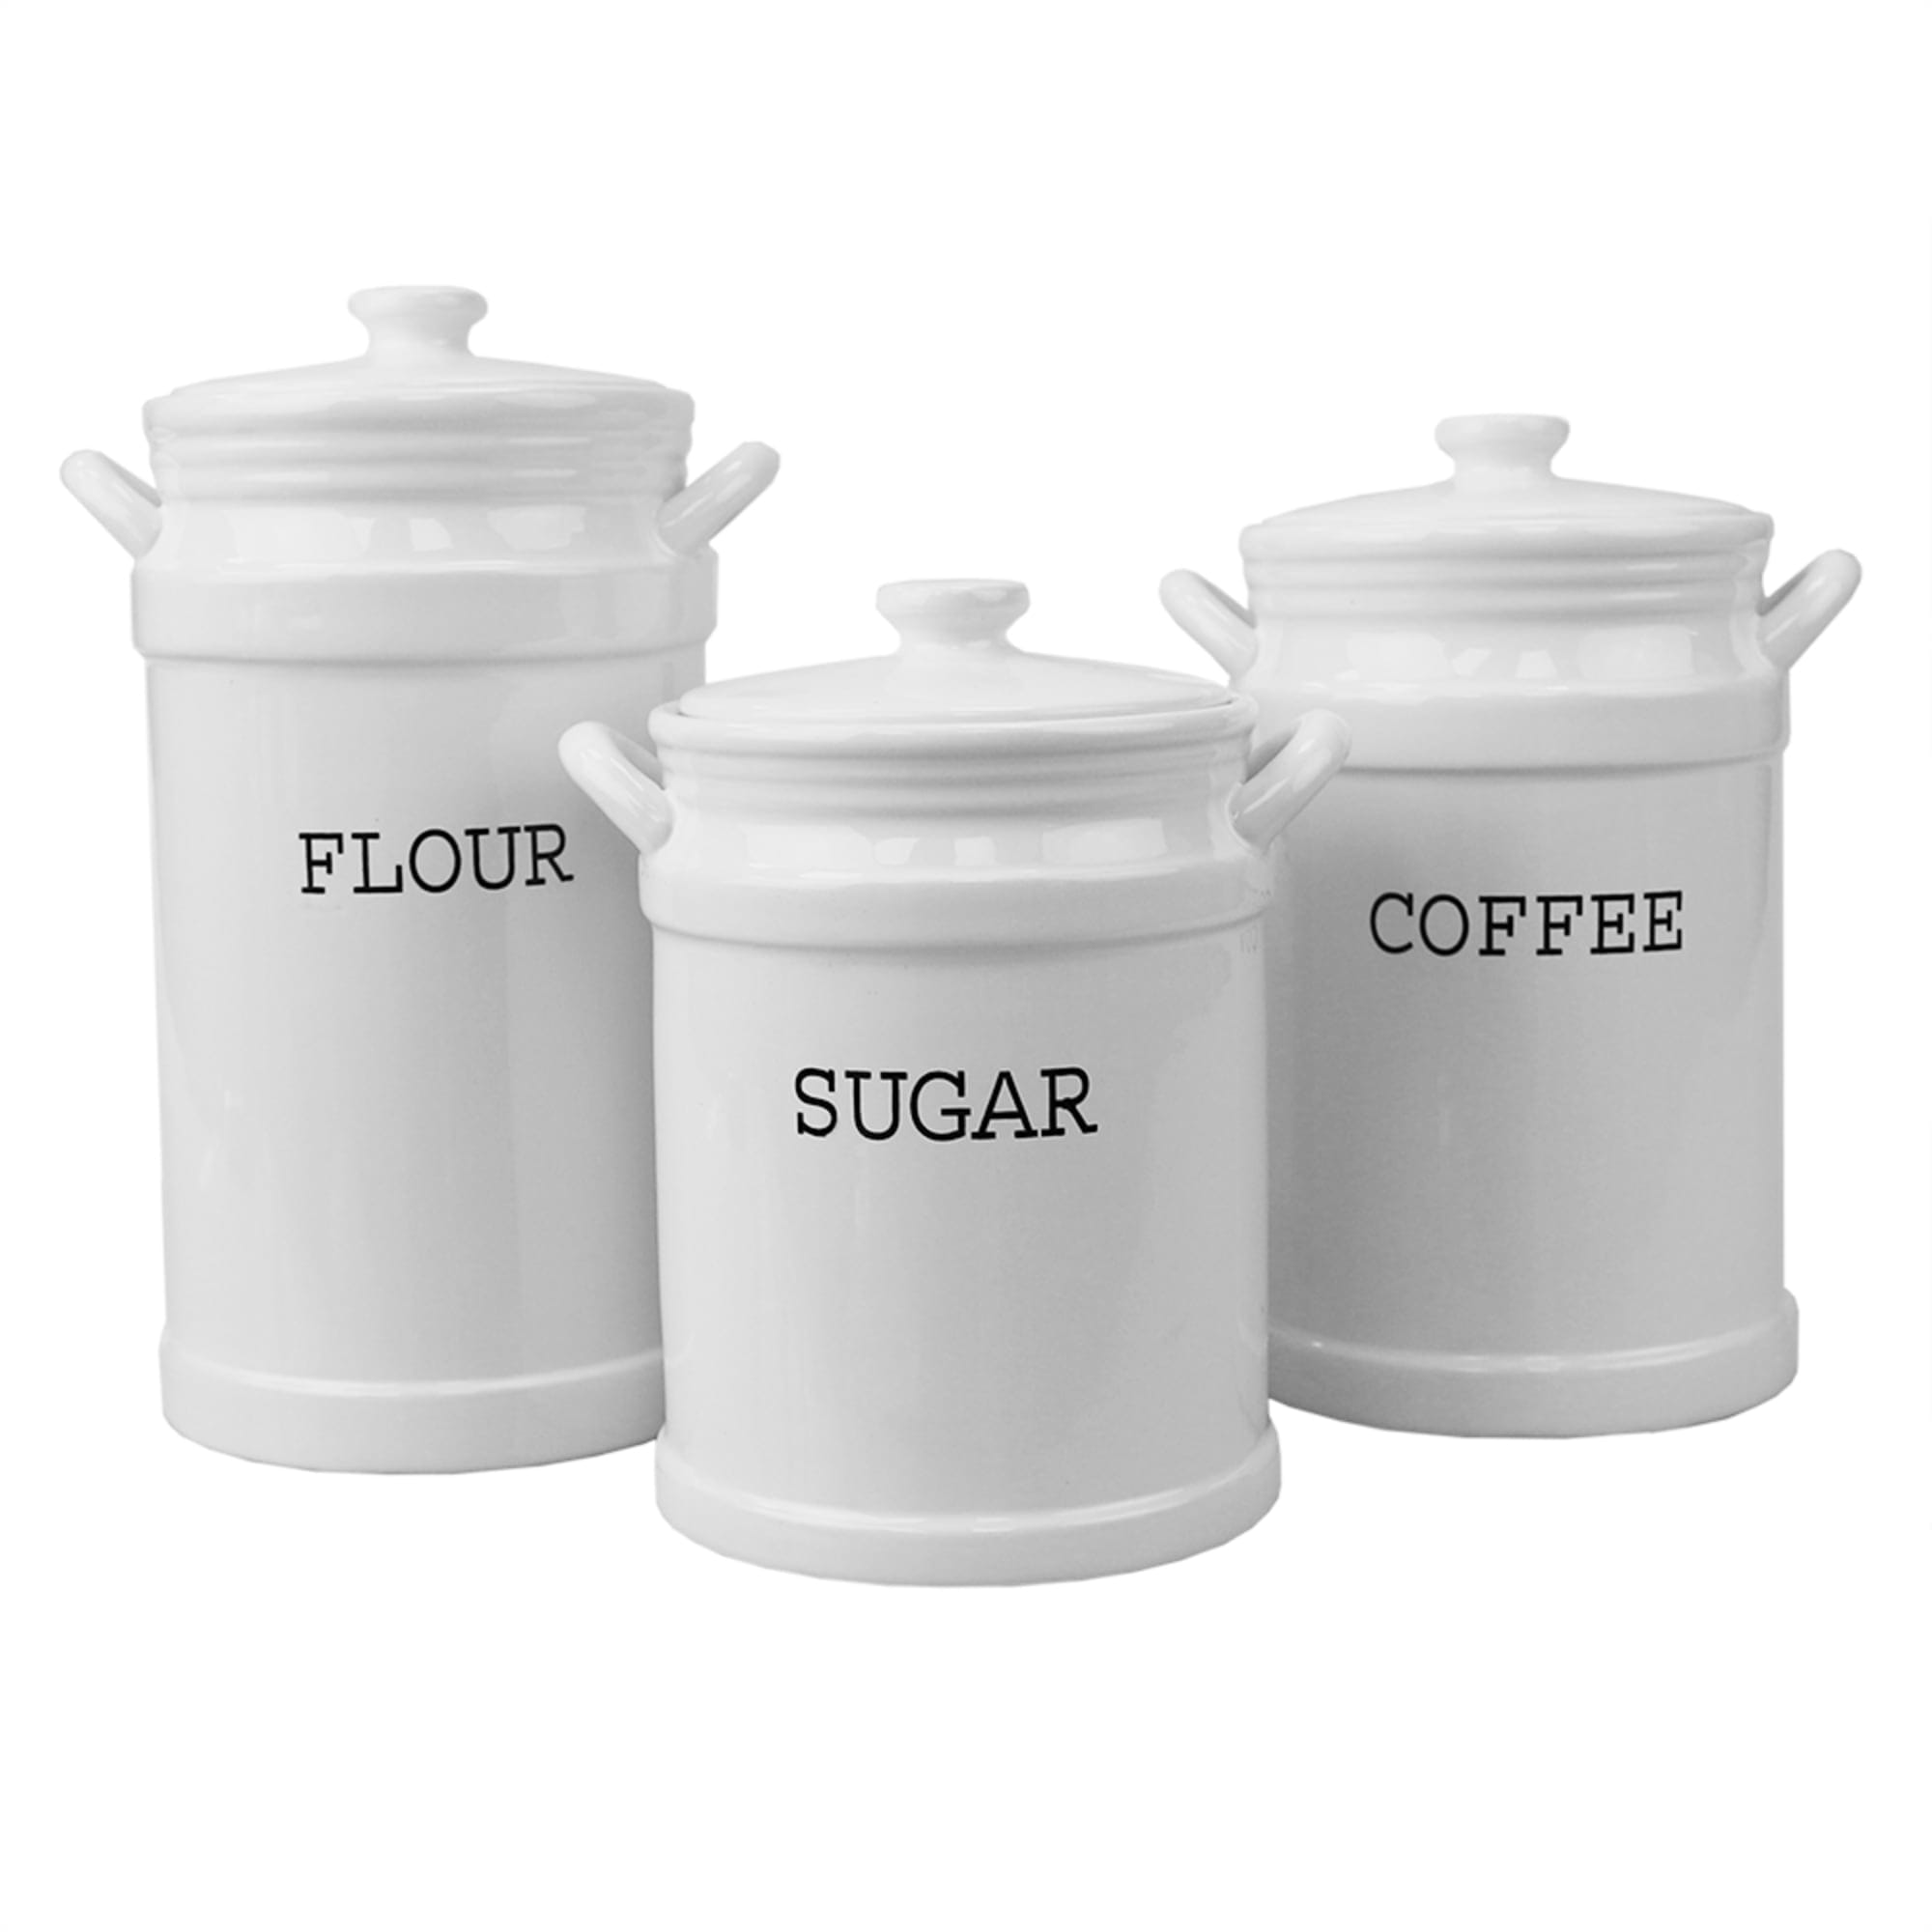 Home Basics Doric 3 Piece Ceramic Canisters, White $20 EACH, CASE PACK OF 2